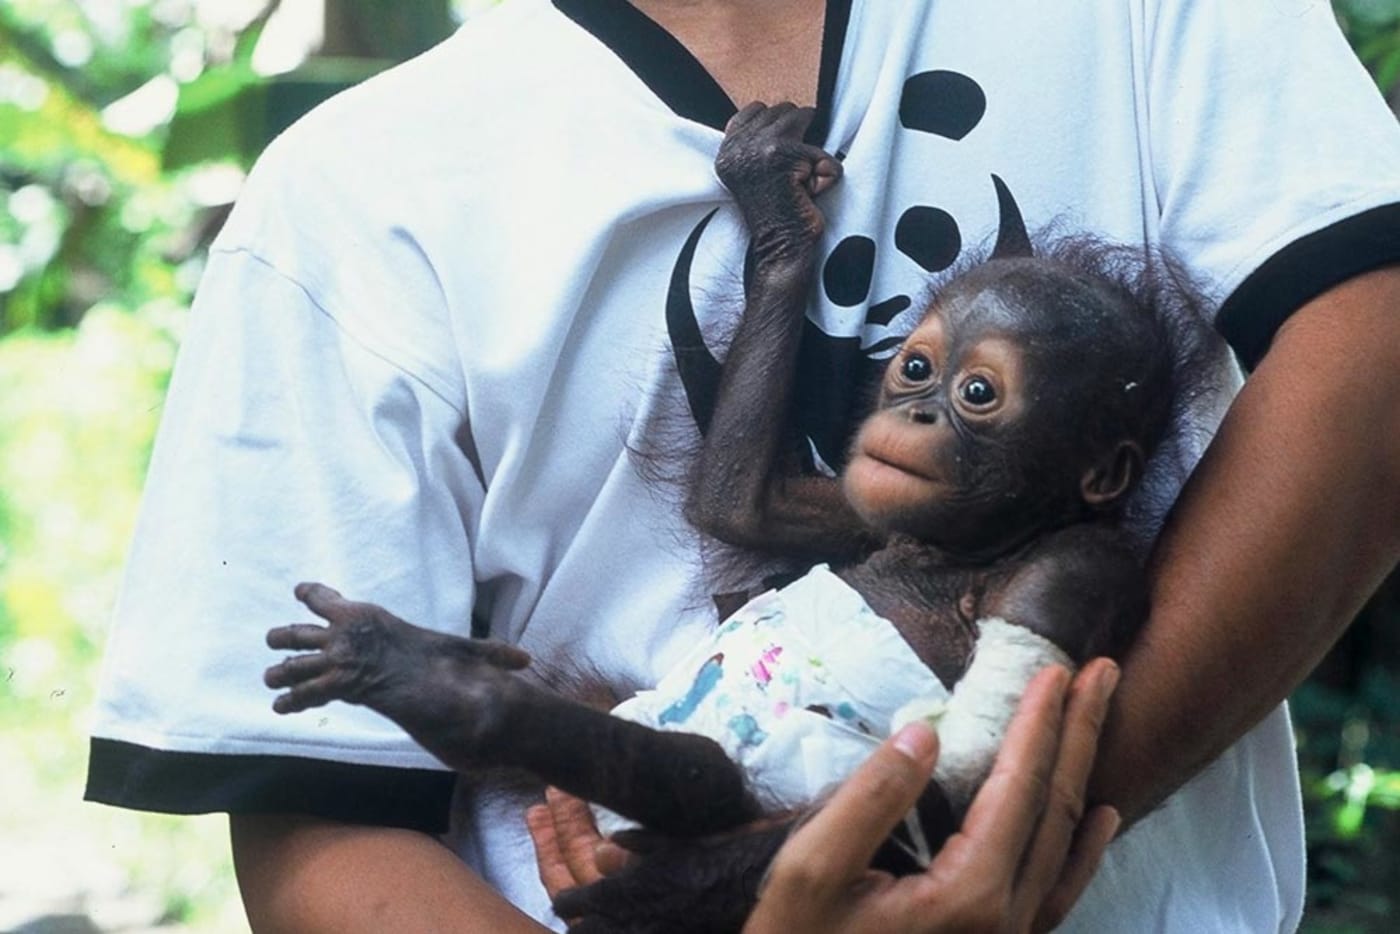 A rescued baby orangutan holds a WWF shirt after its mother was killed by poachers